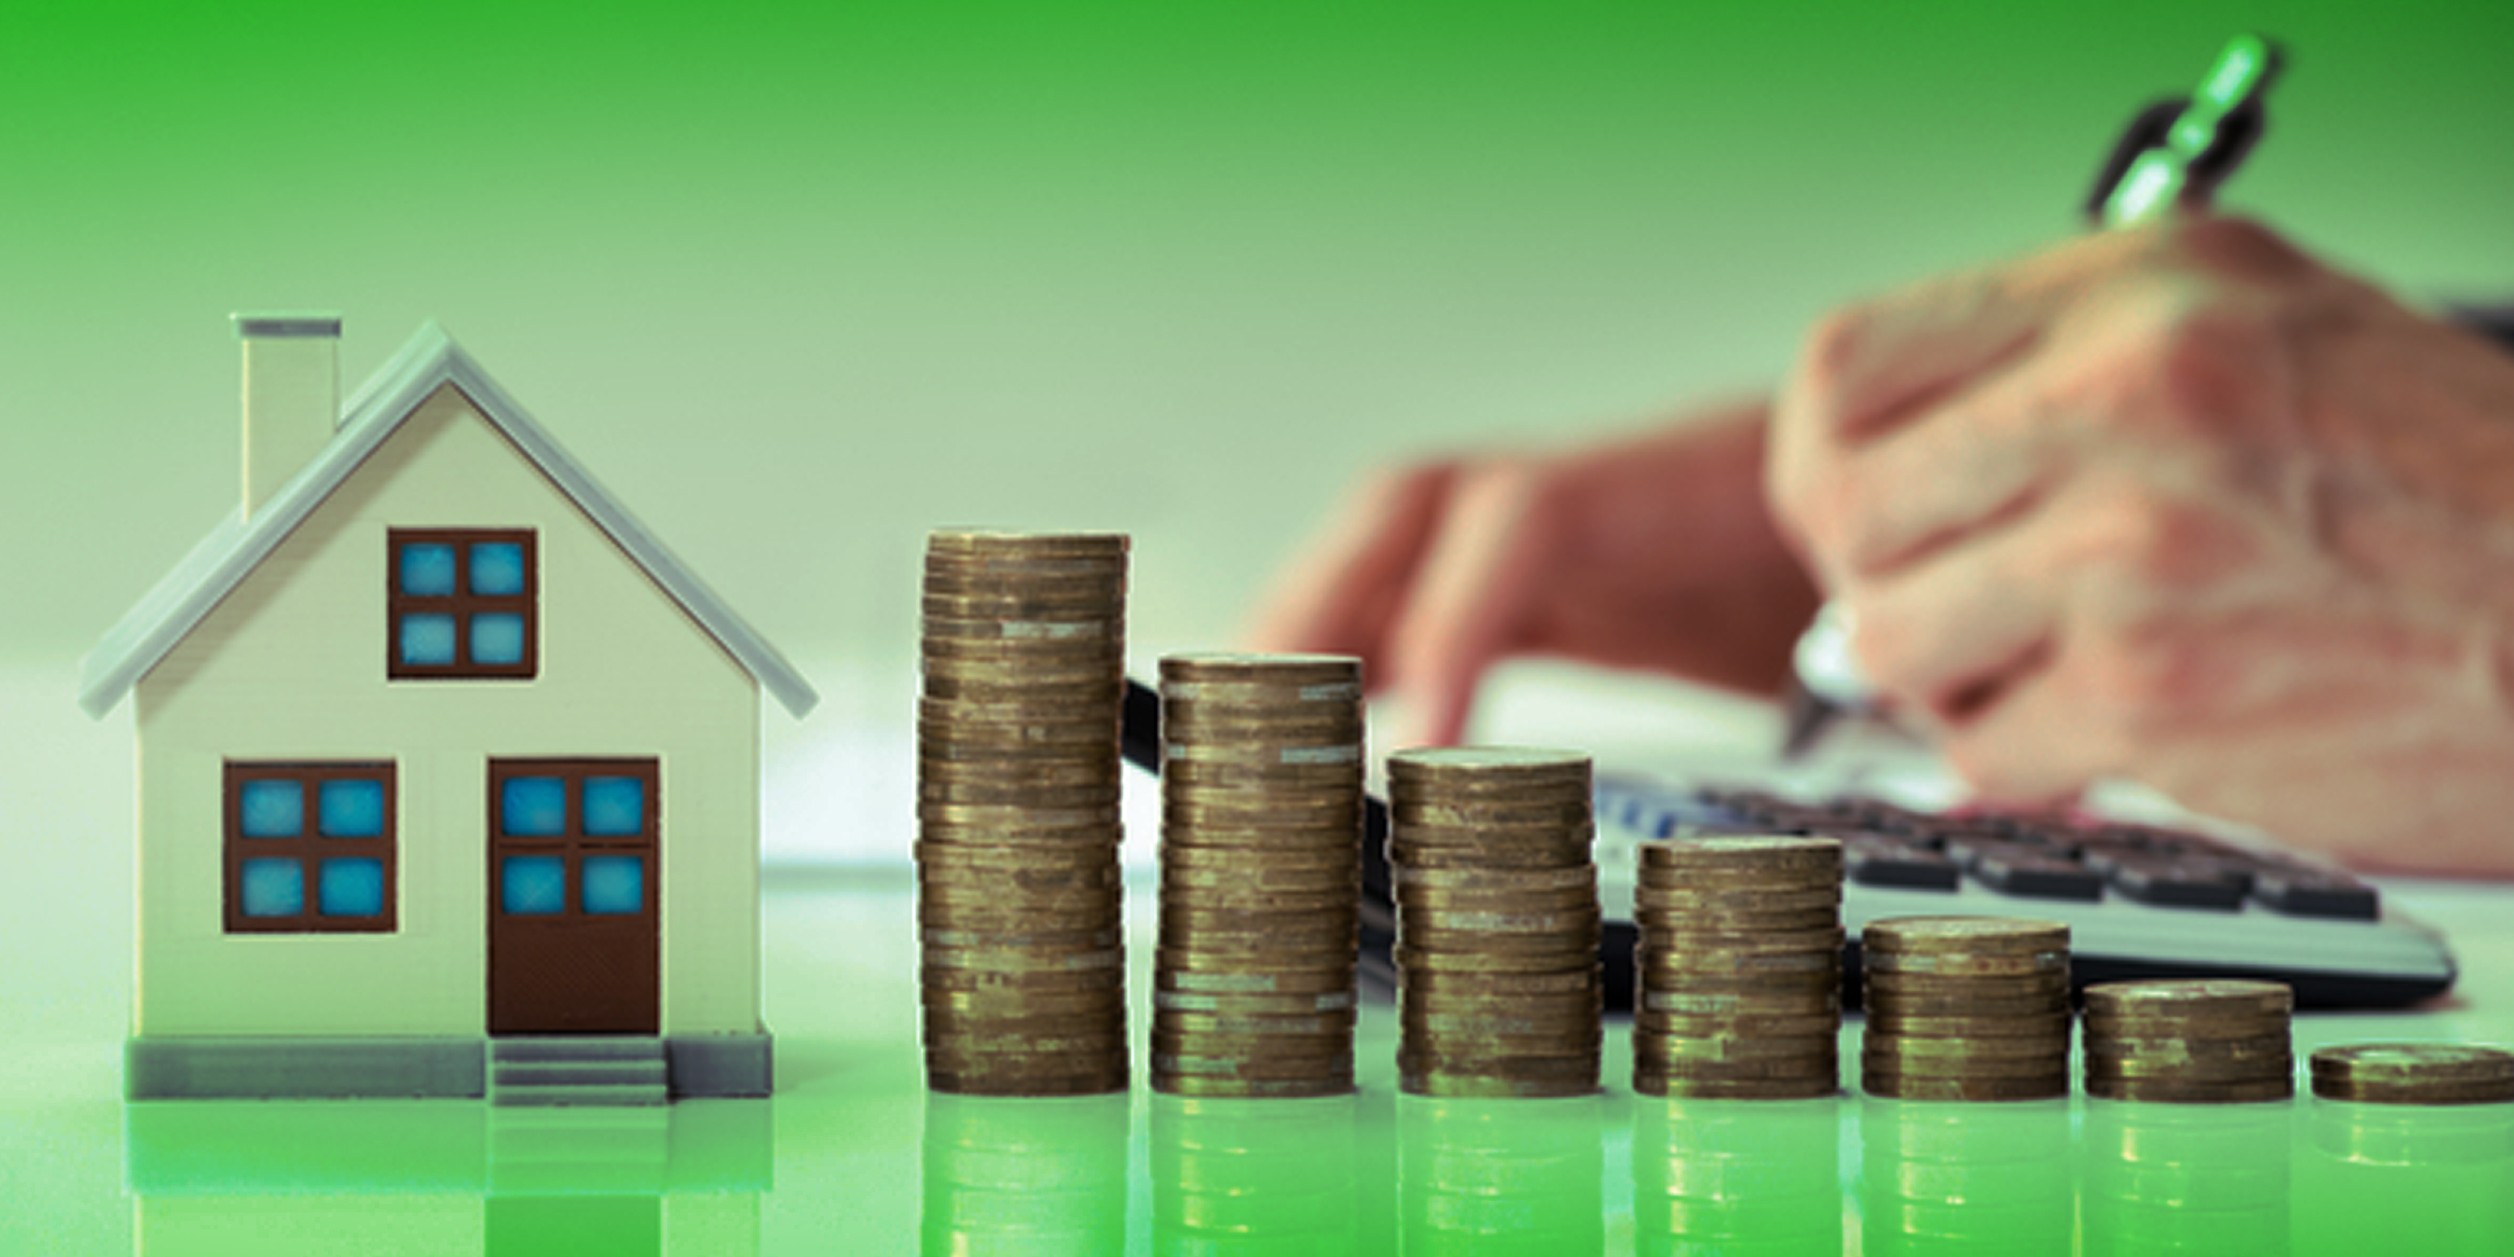 How to Pay Ghaziabad Property Tax Online?